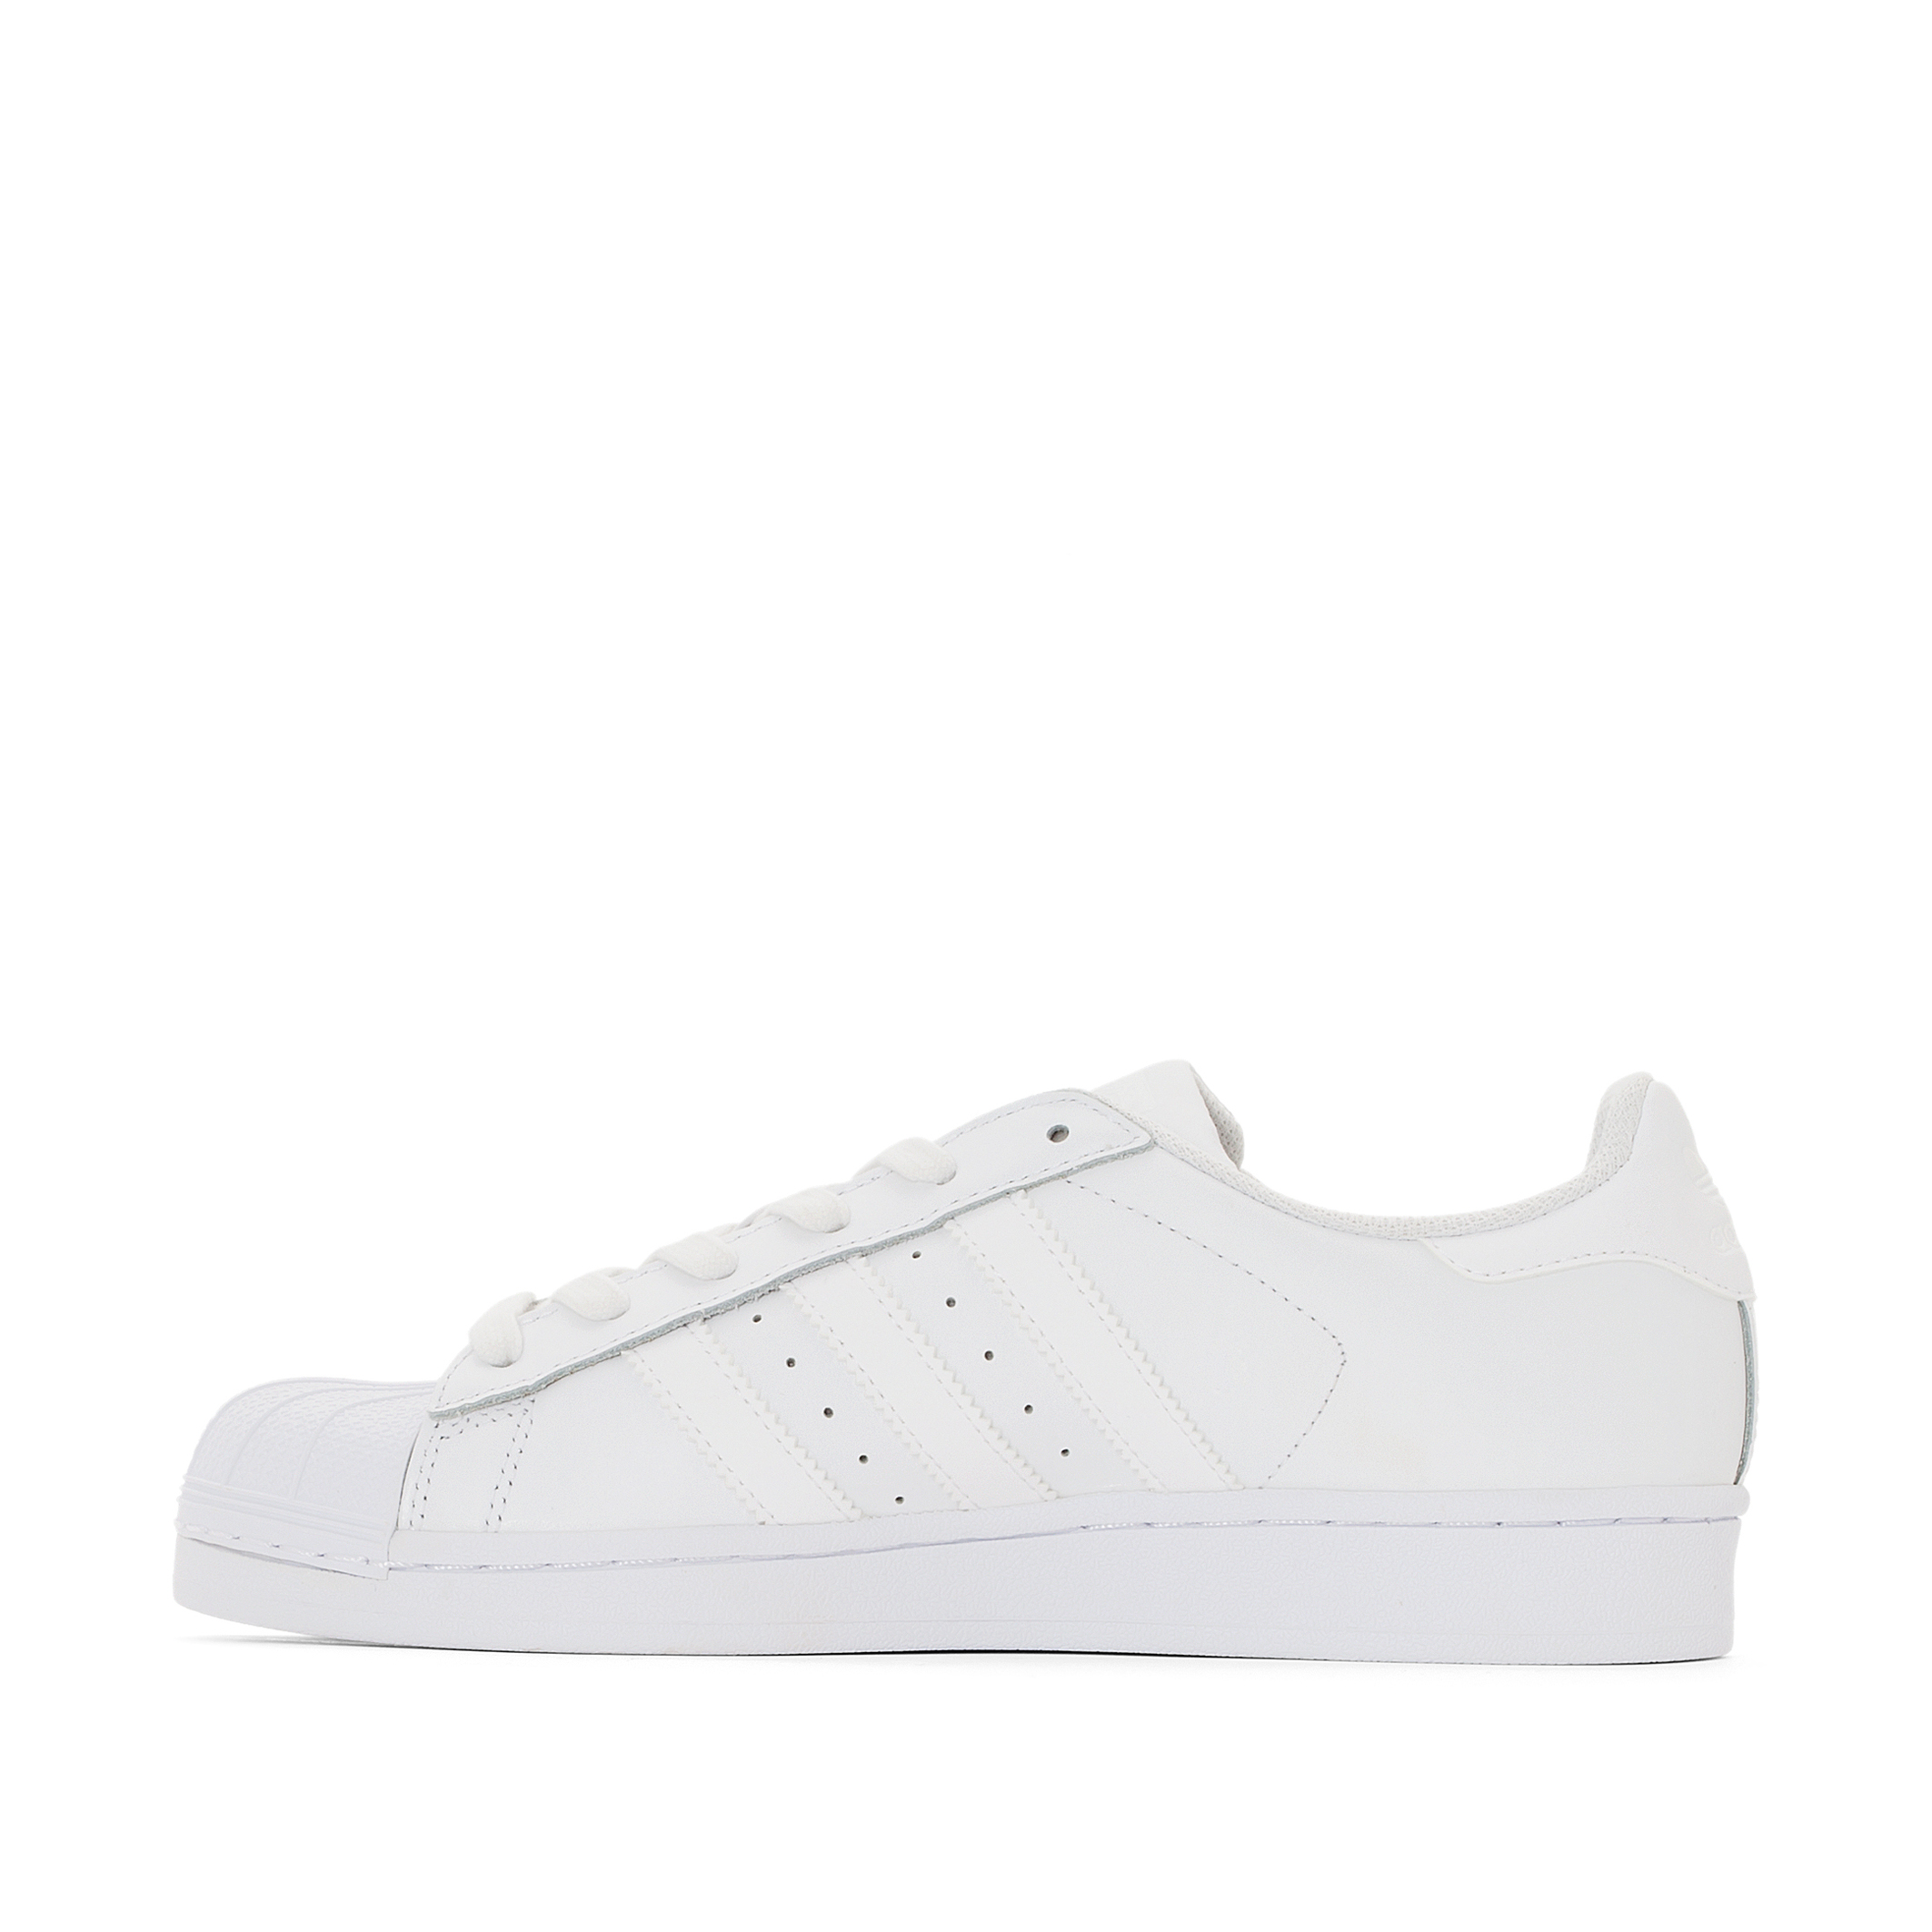 adidas originals superstar - sneakers laag - red/white